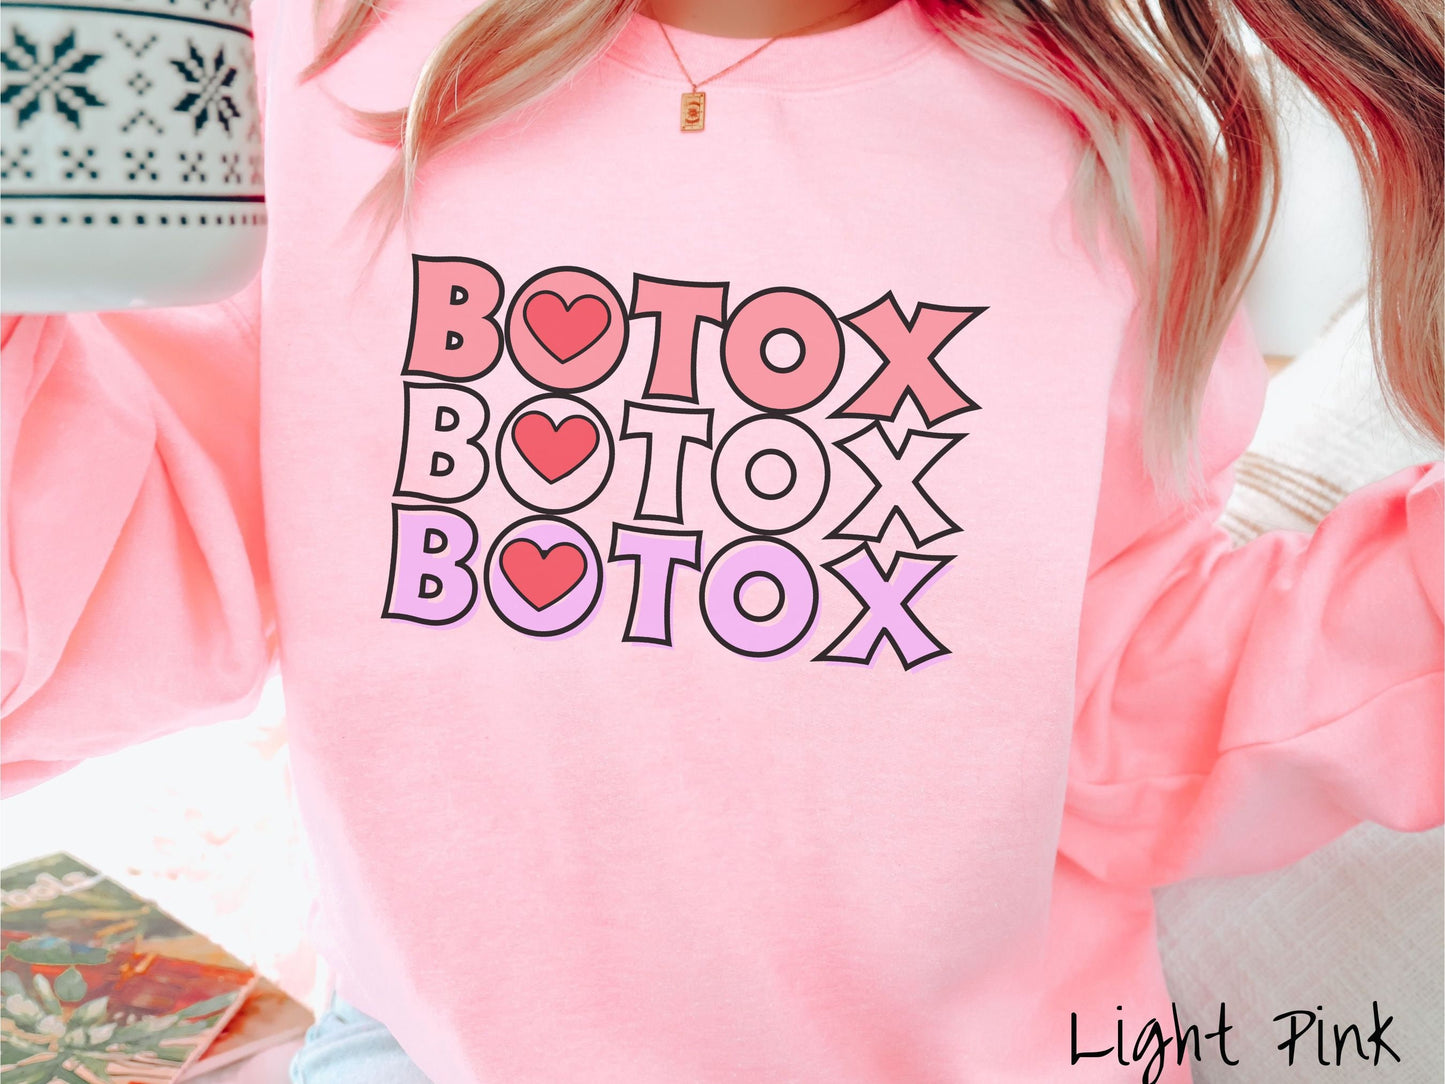 A woman wearing a cute light pink colored sweatshirt with the word Botox listed three times in different shades of pink and red, with red hearts inside the first letter O in Botox.